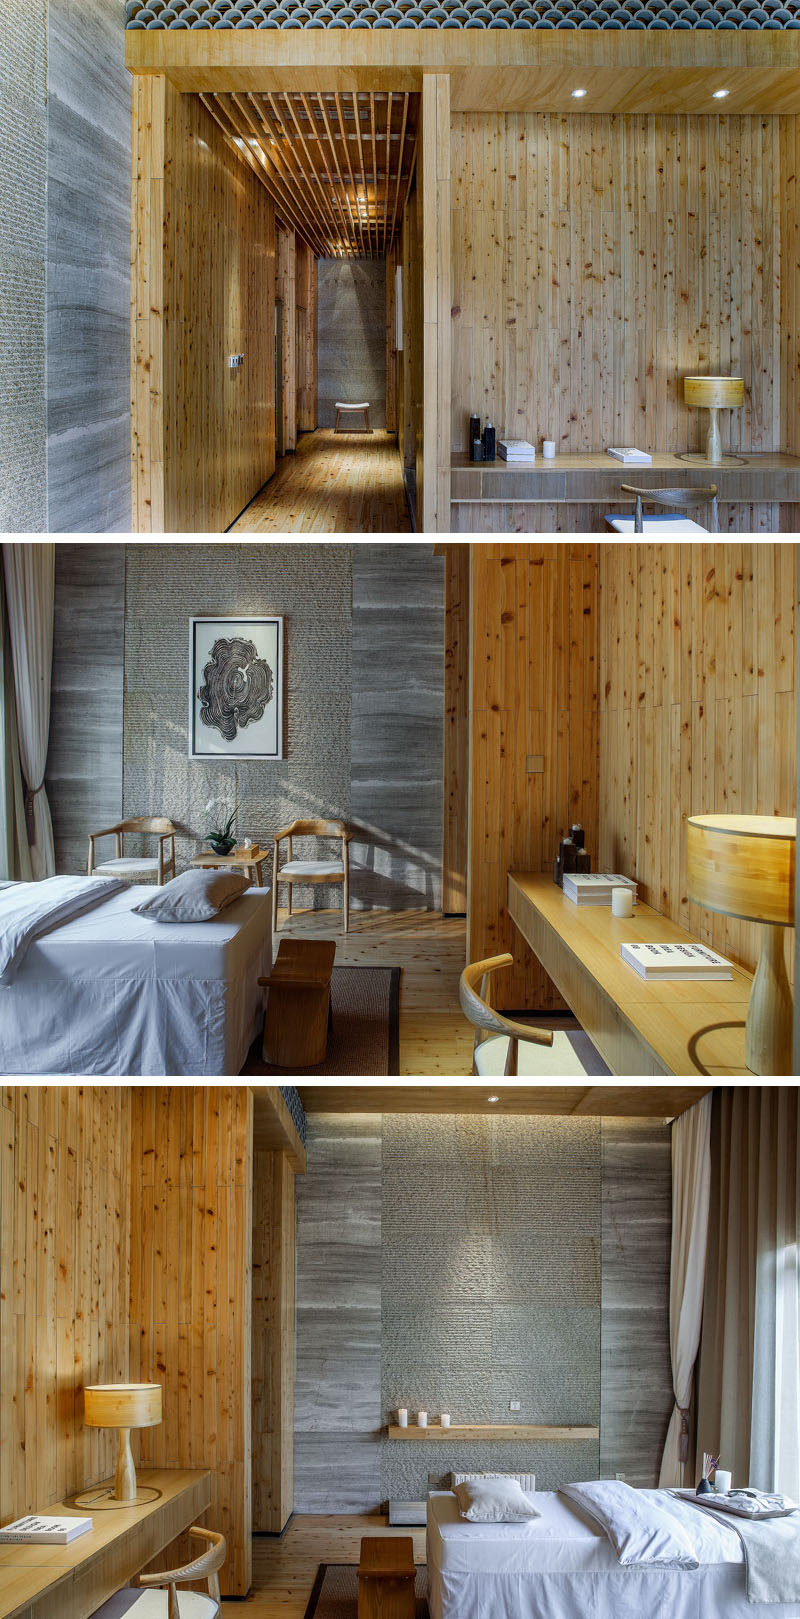 This massage room in a spa in China has a very natural color palette, with wood and stone being key elements.